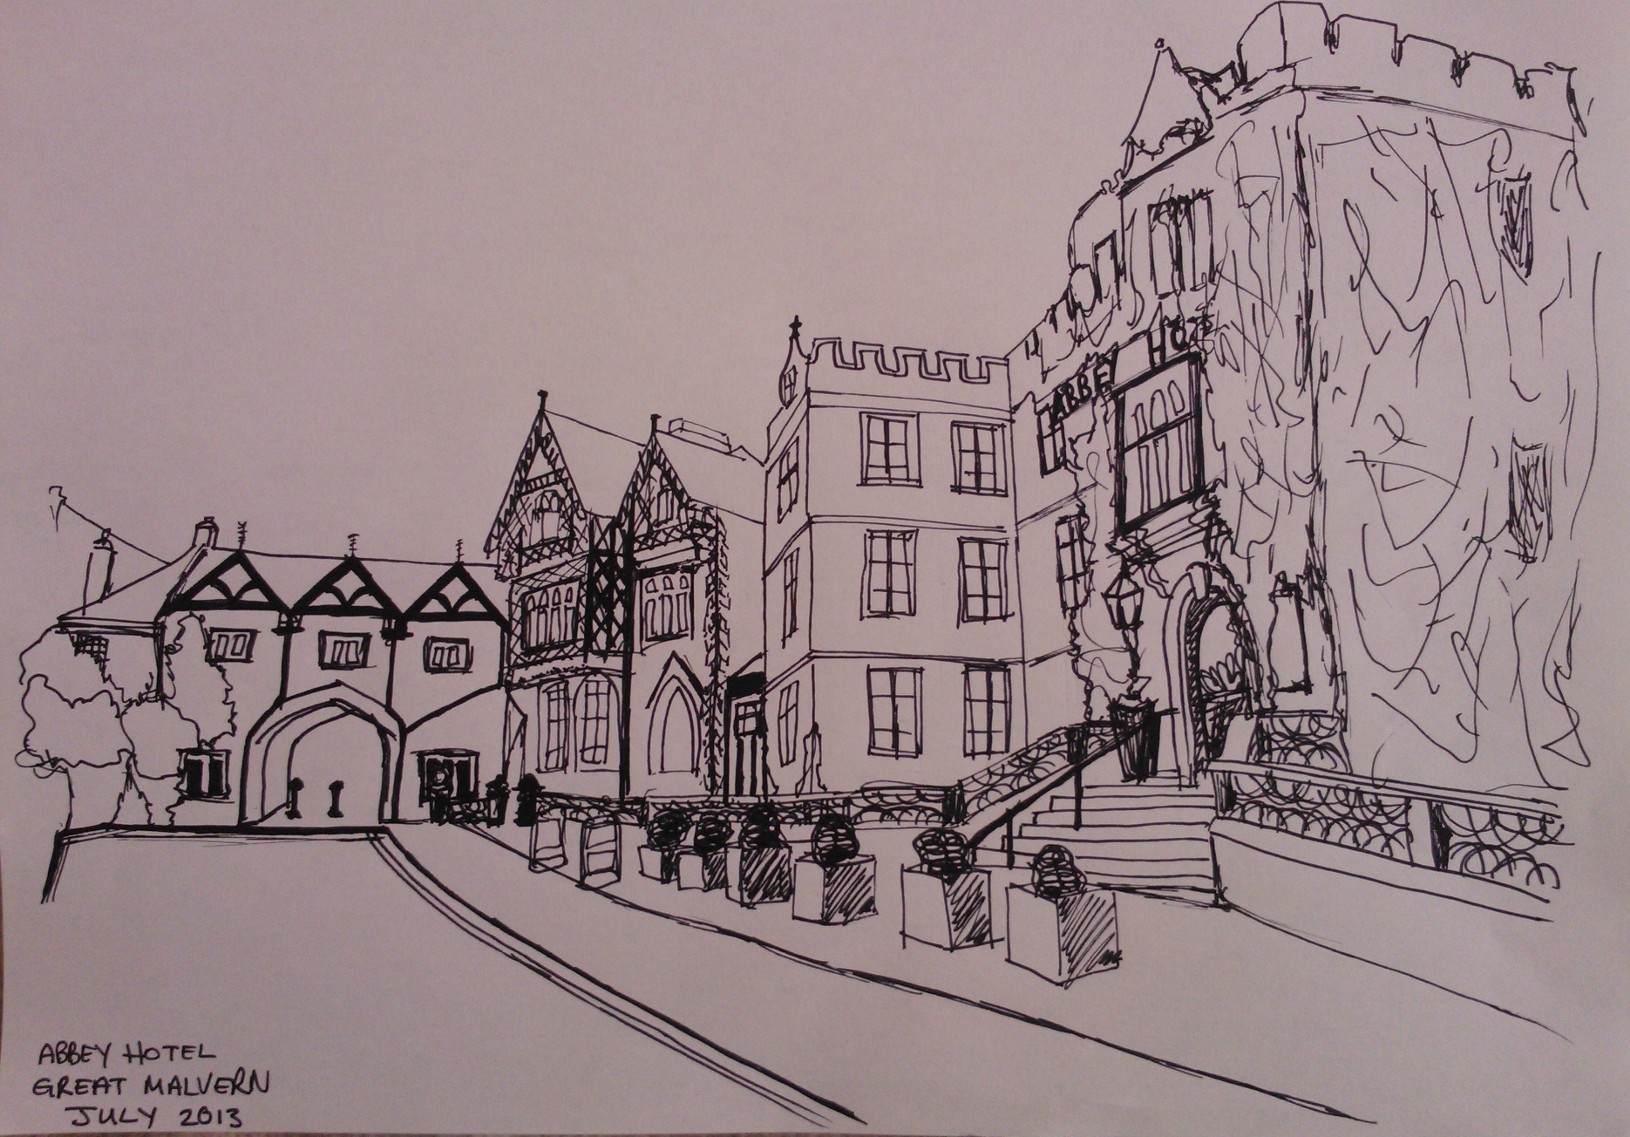 The Abbey Hotel in Great Malvern, Worcestershire - Drawing Project - July